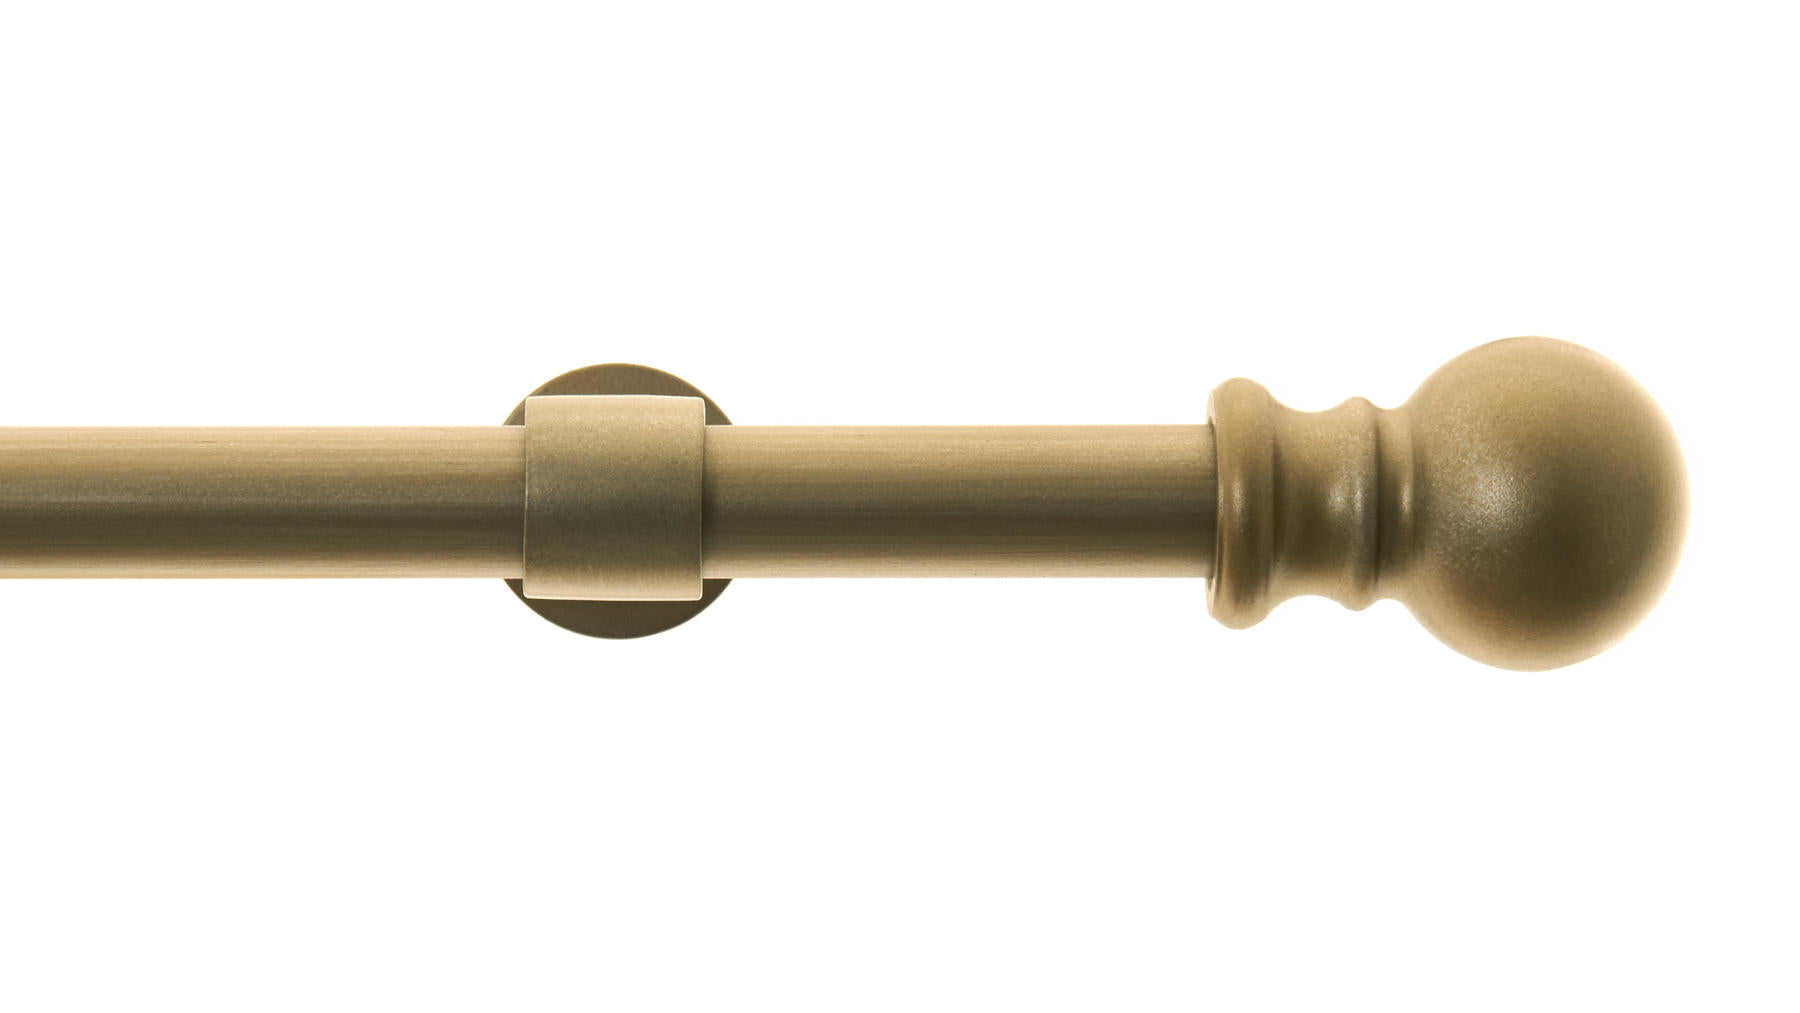 1 Curtain Rod and End Cap Finial Hardware Set